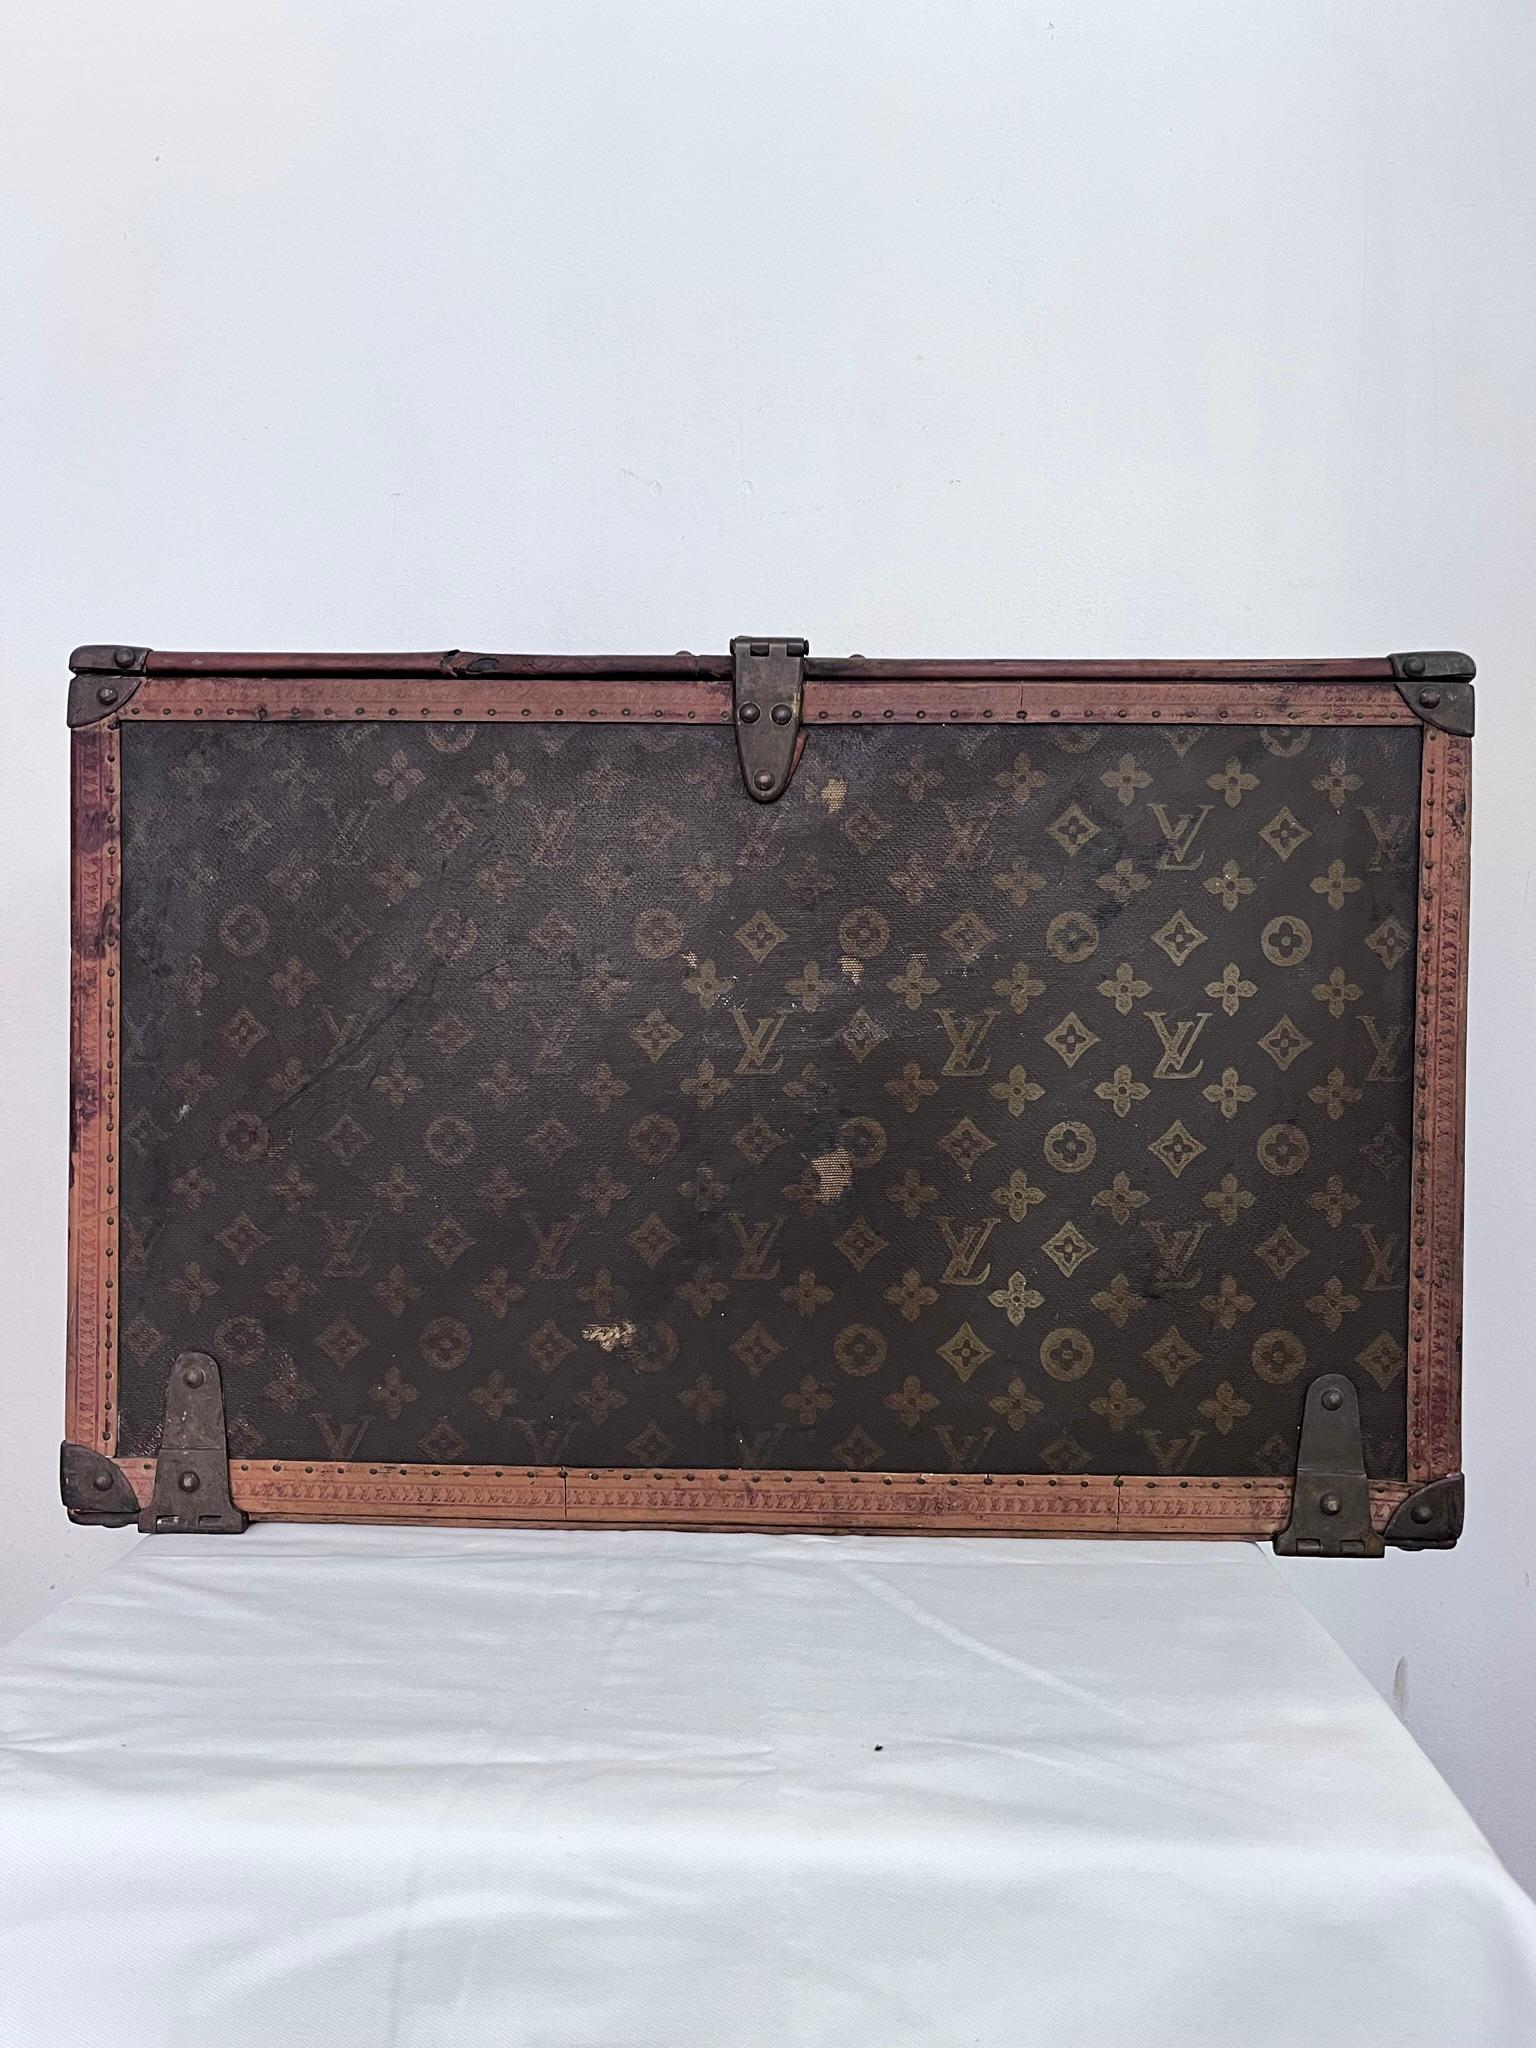 French Louis Vuitton Traveling Desk 1910-1920